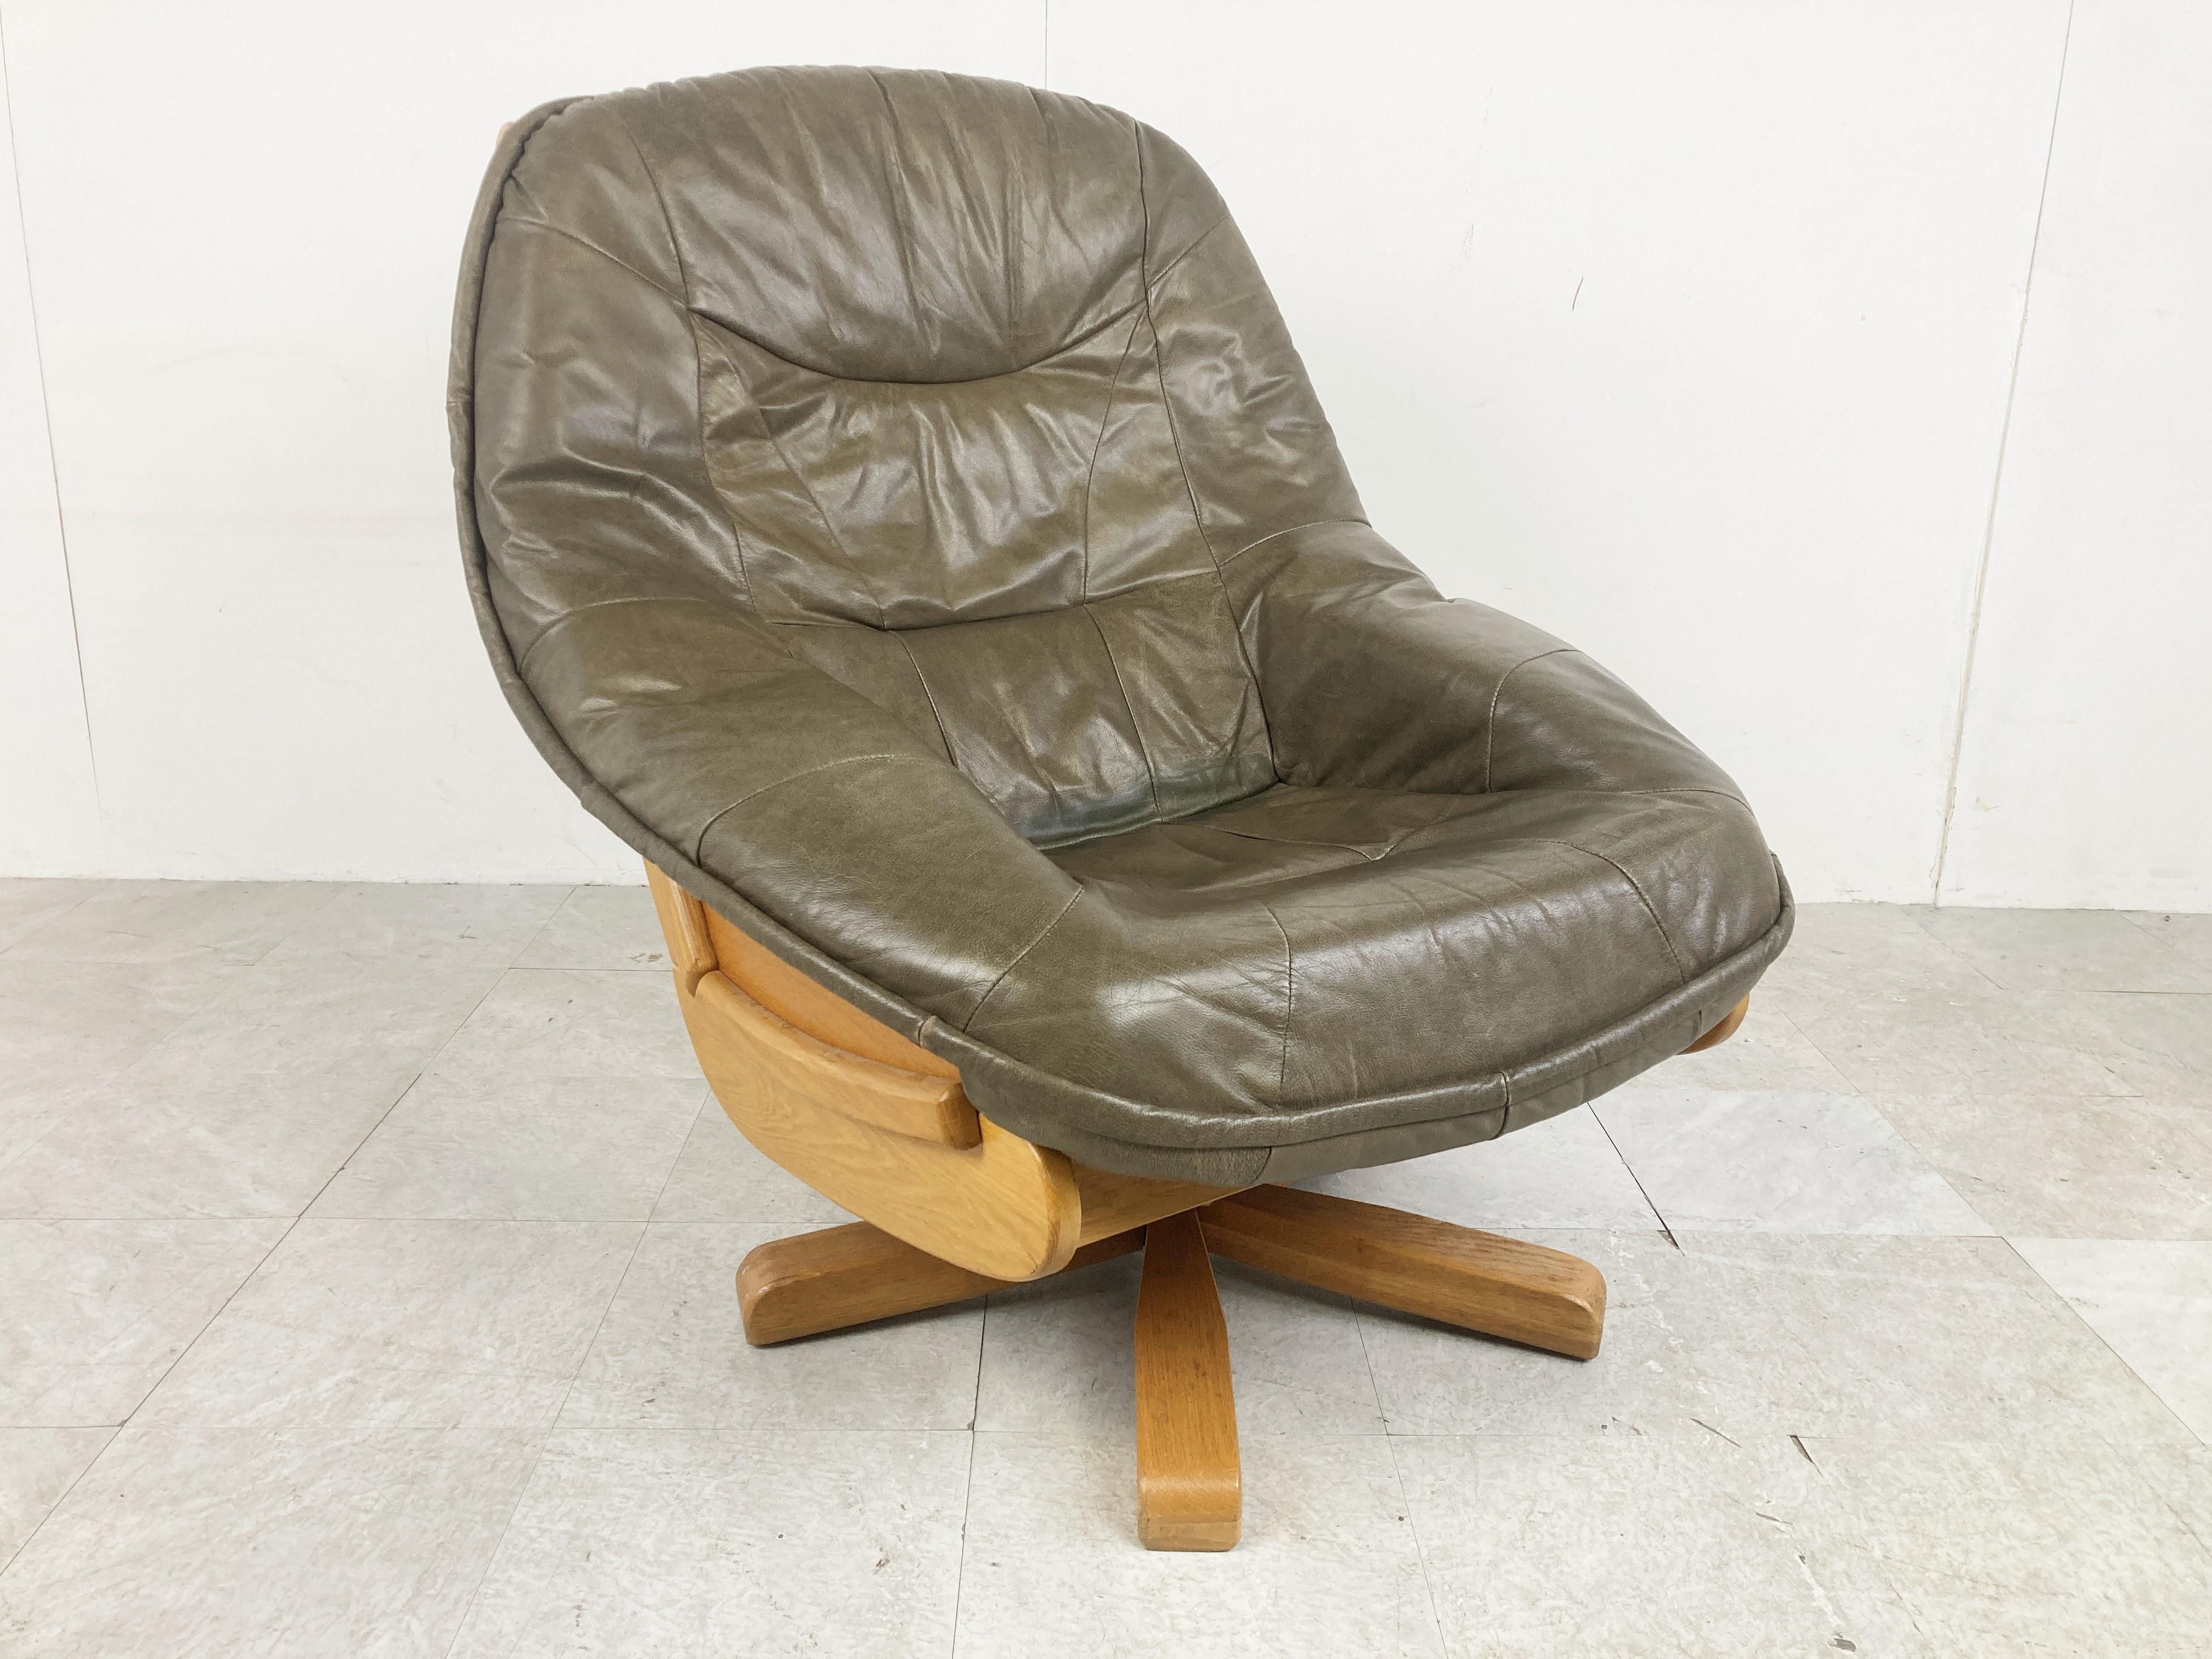 Brutalist Oak and Leather Swivel Chair, 1970s For Sale 2